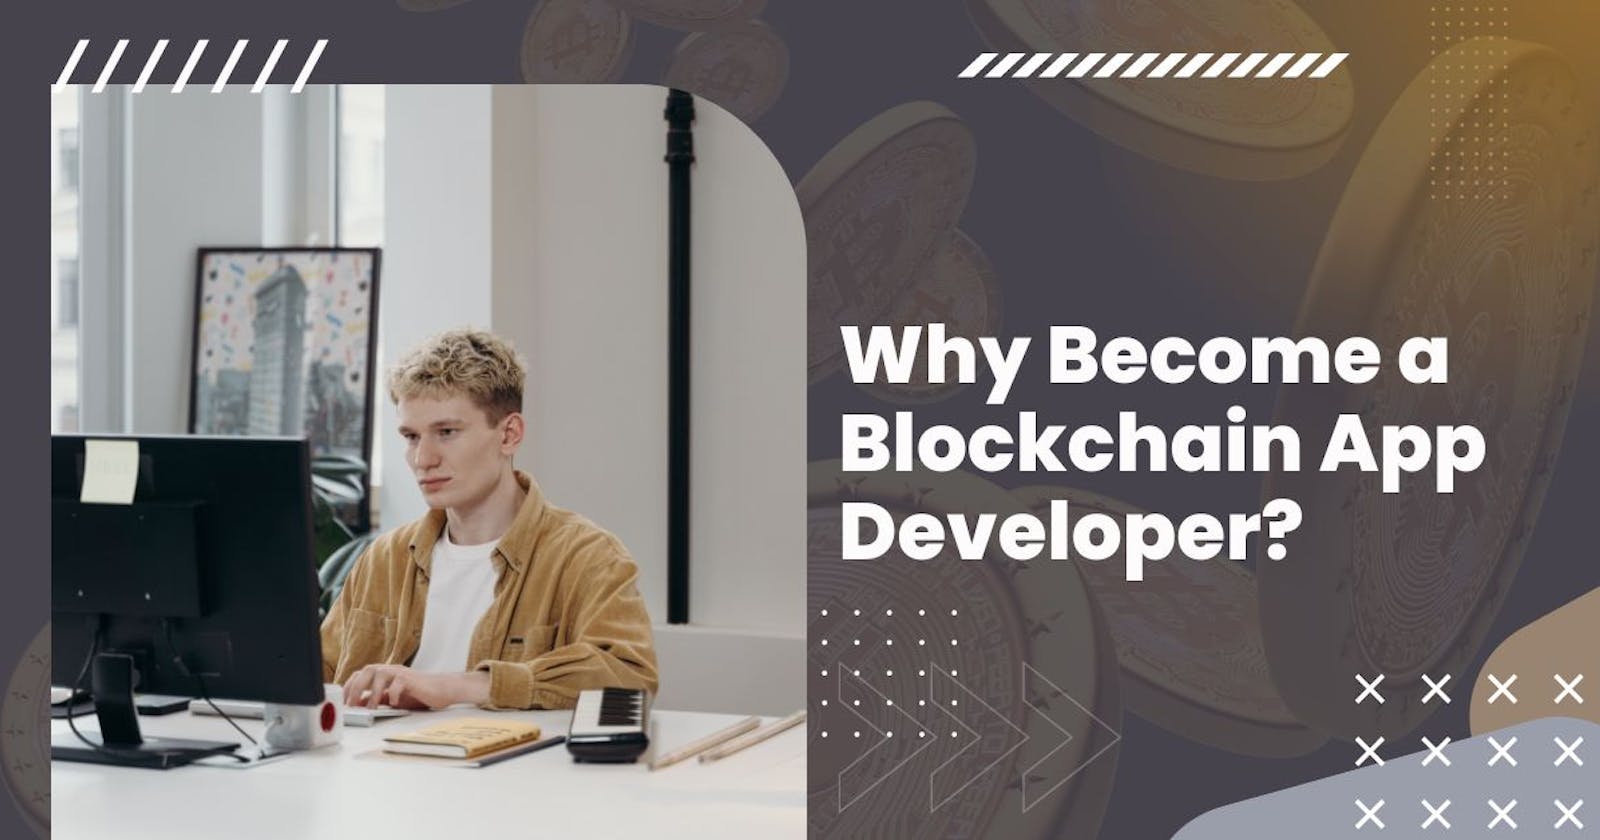 Why Become a Blockchain App Developer?